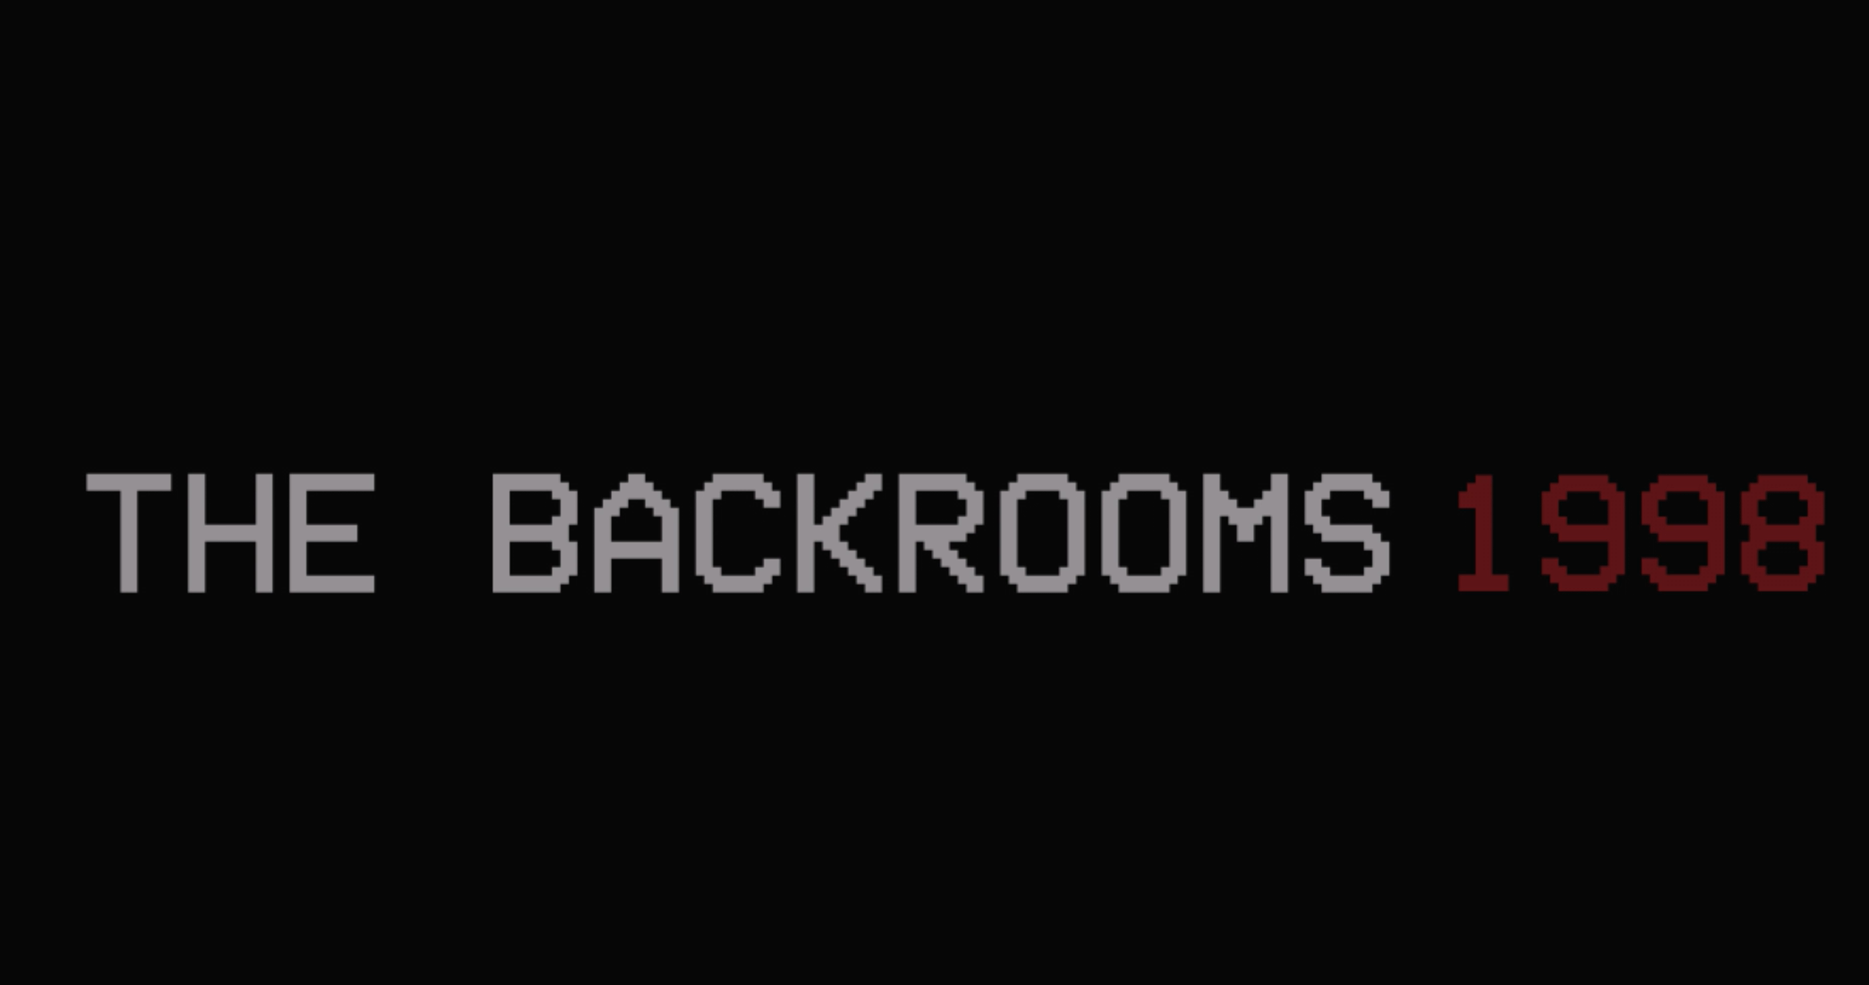 The Backrooms 1998 is High Quality Backrooms Content - DREAD XP